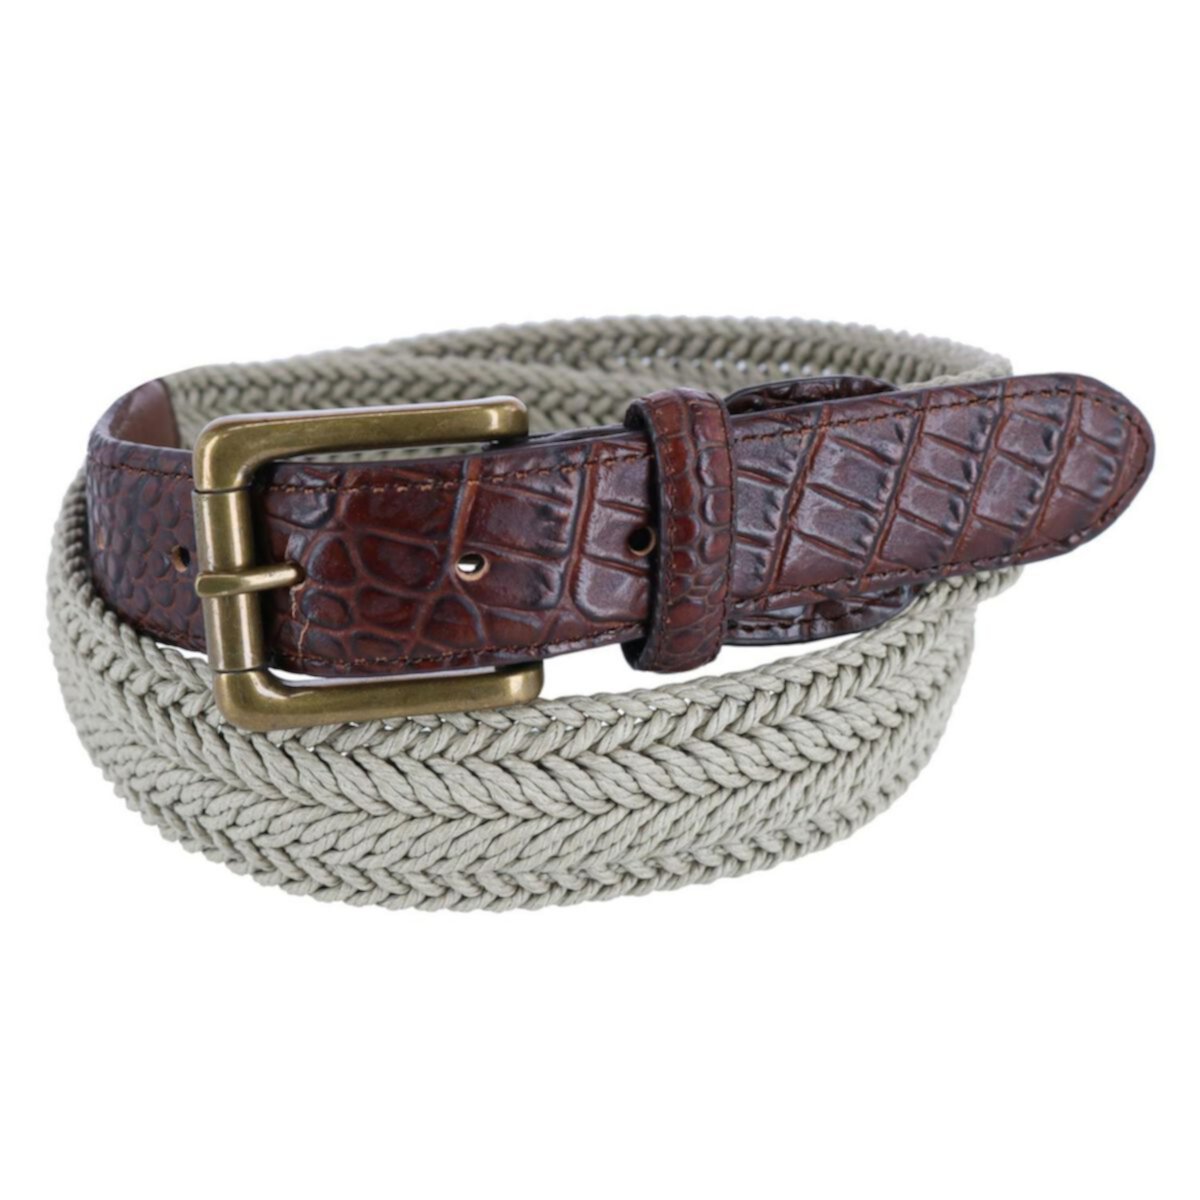 Ctm Men's Big & Tall Waxed Braided Belt With Croc Print Ends CTM